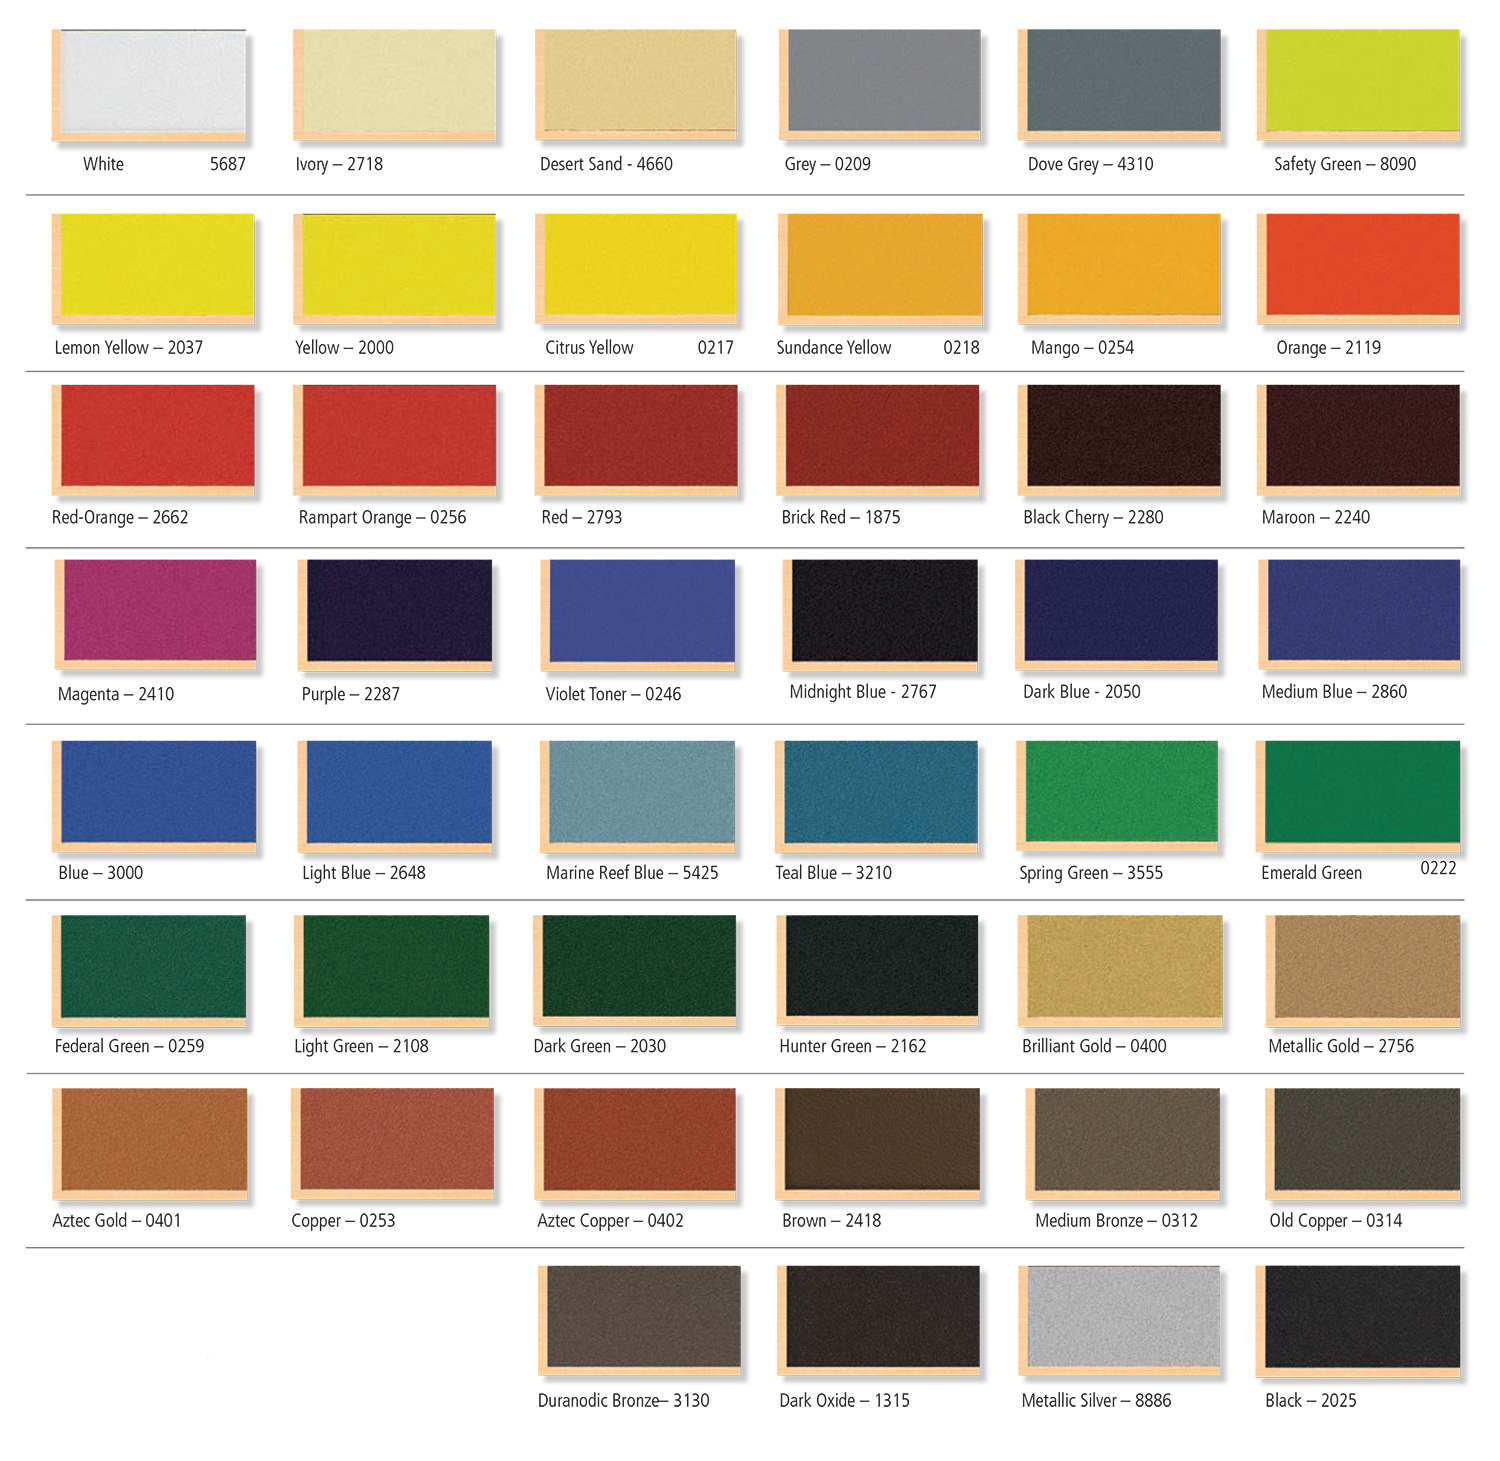 Standard Painted Colors